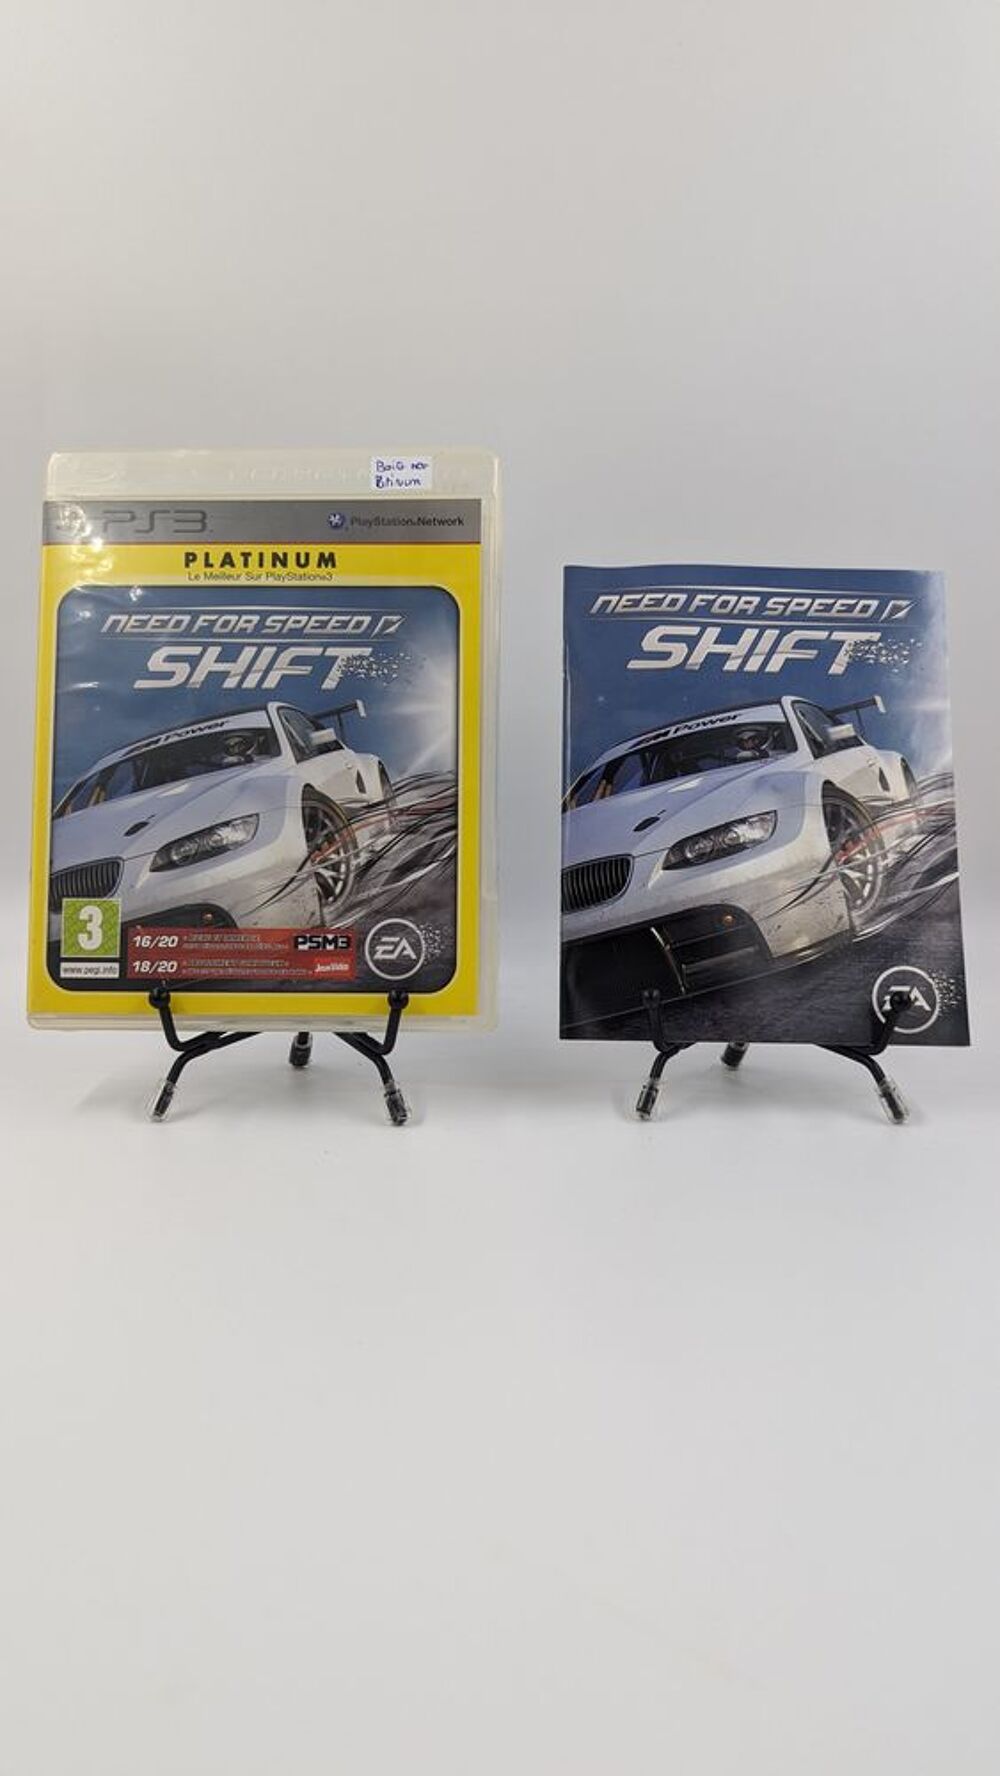 Jeu PS3 Playstation 3 Need for Speed Shift Platinum Complet Consoles et jeux vidos